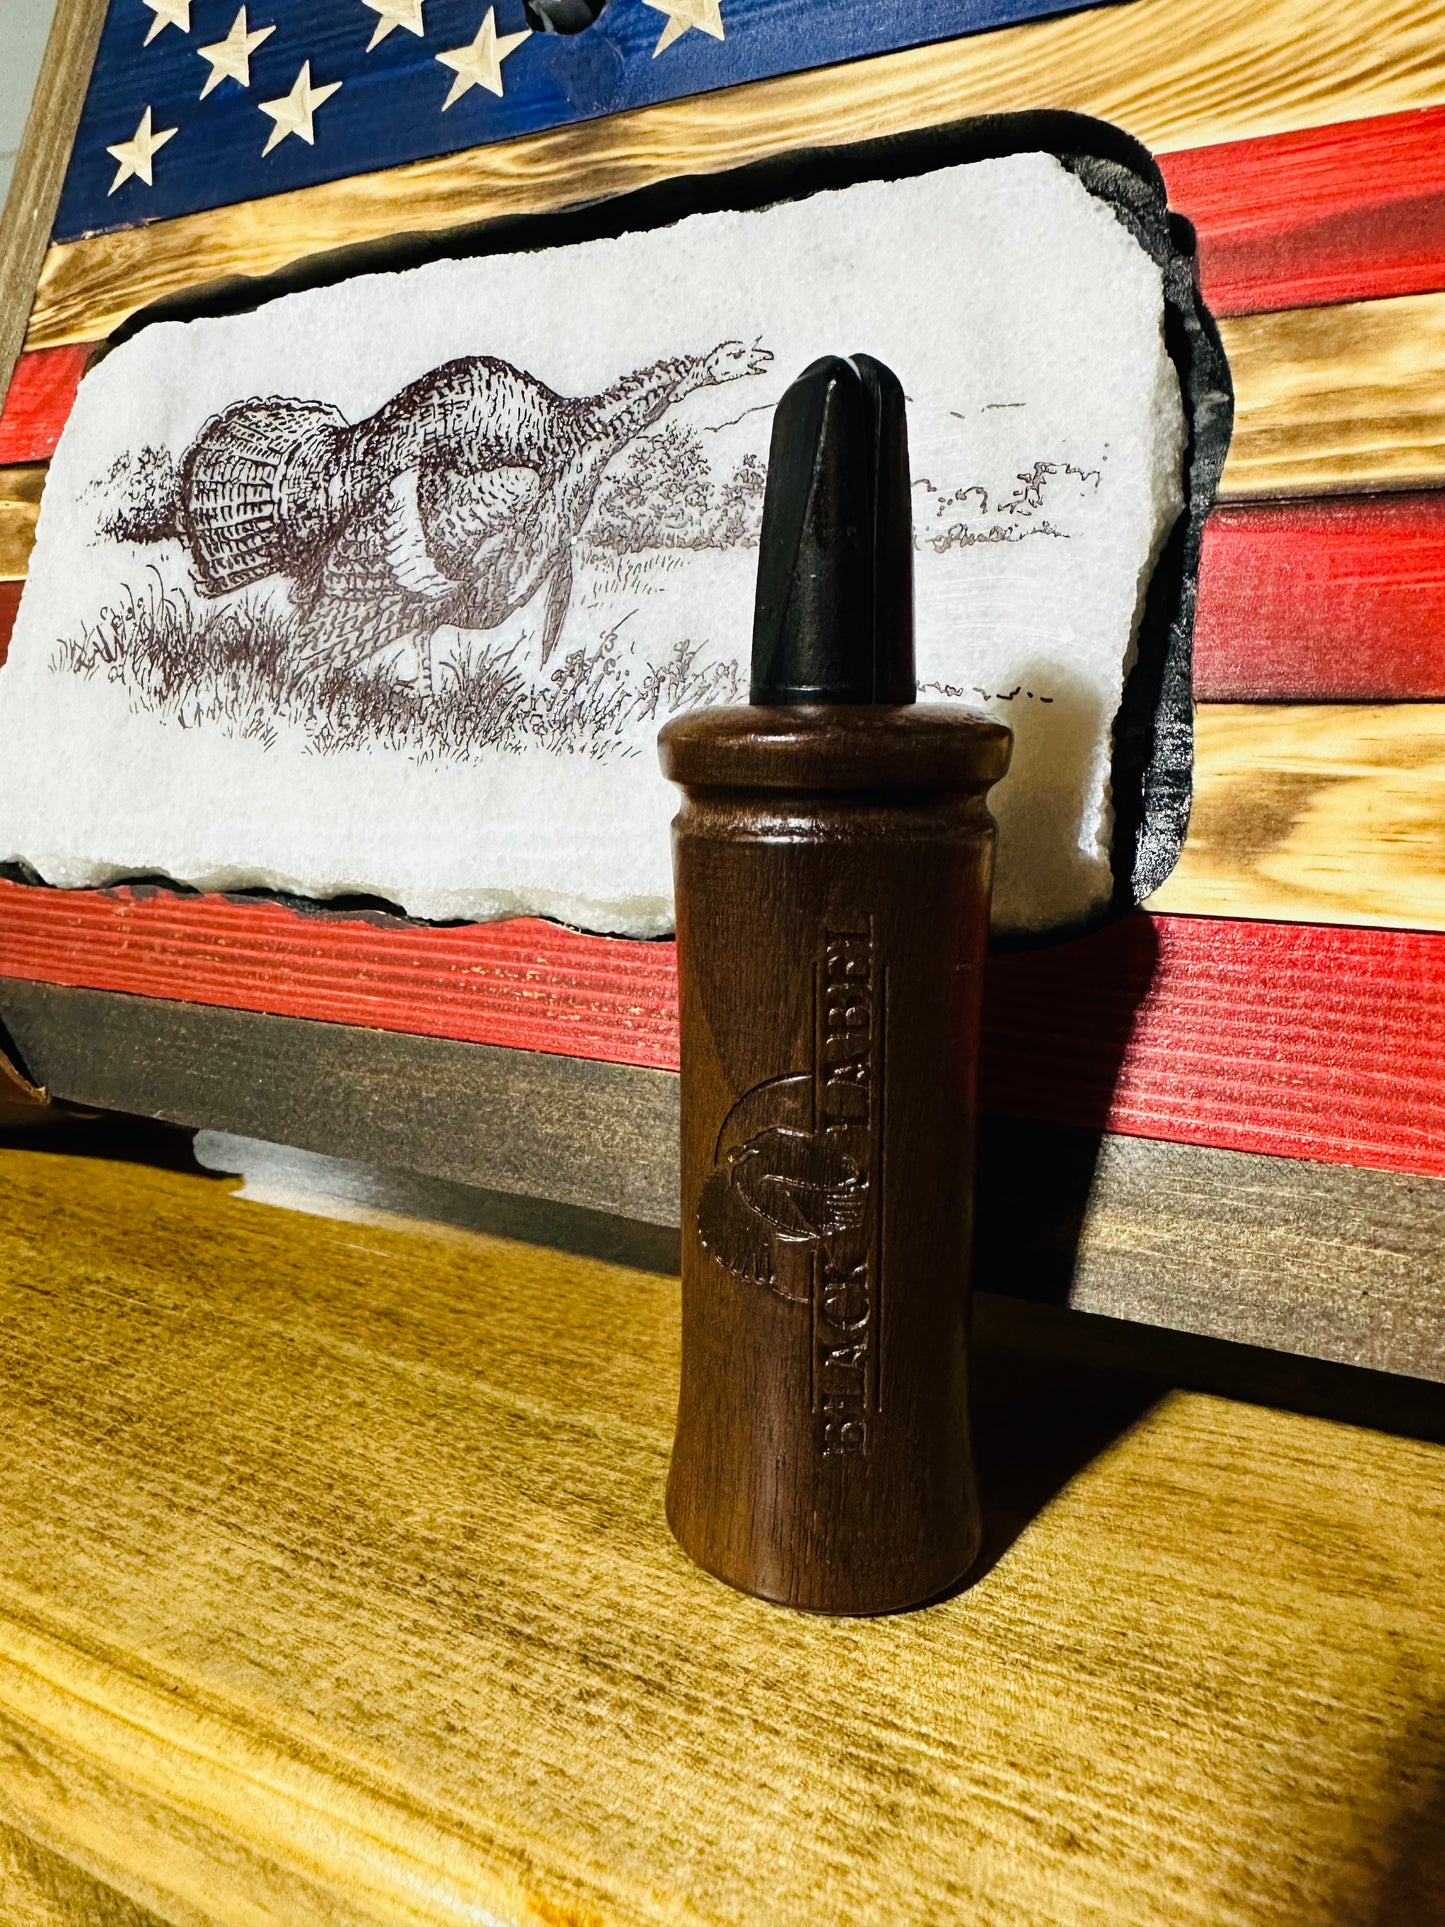 The "Rook" Crow Call